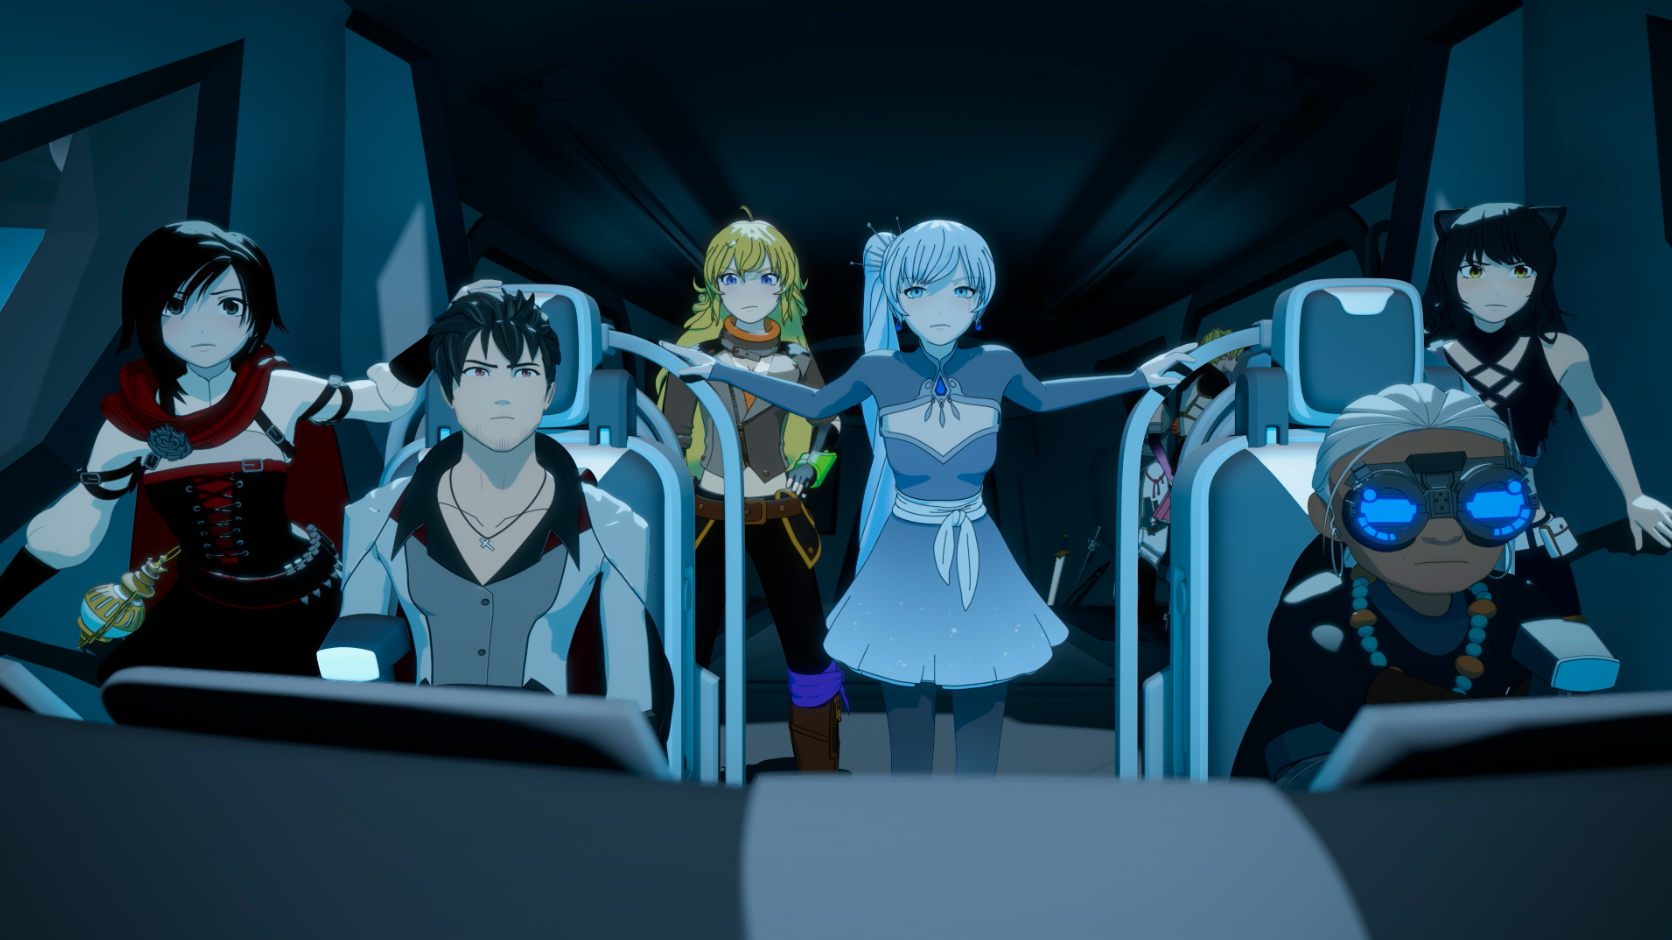 Rooster Teeth dropped the trailer for 'RWBY' Volume 7 at NYCC.